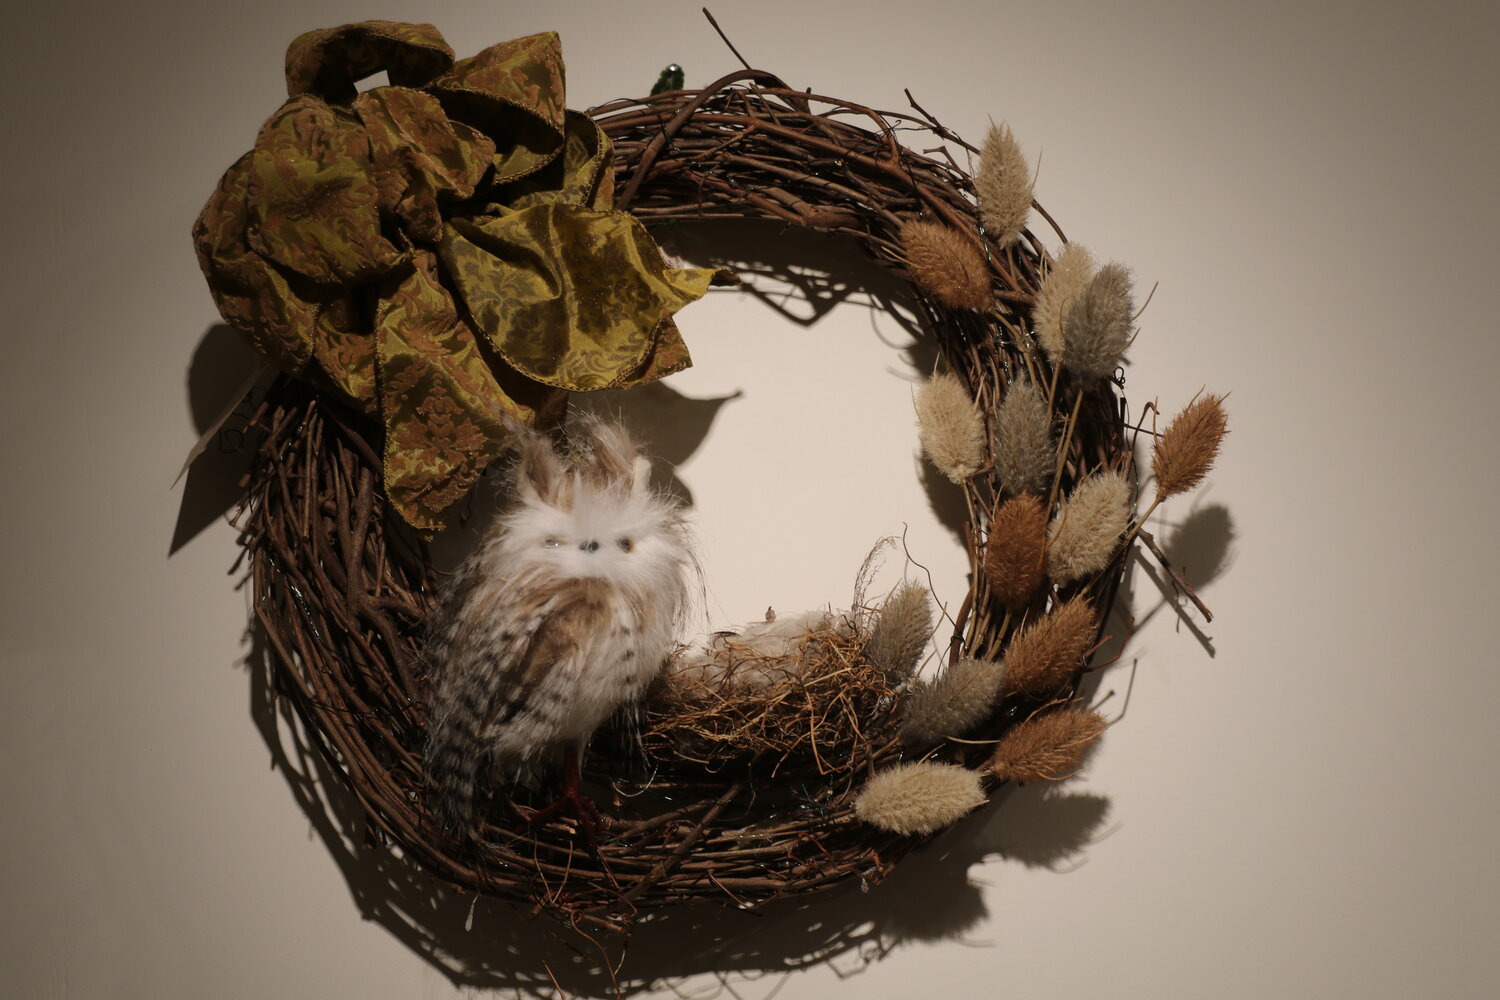 Laura Holden's entry features a stuffed owl and nest.